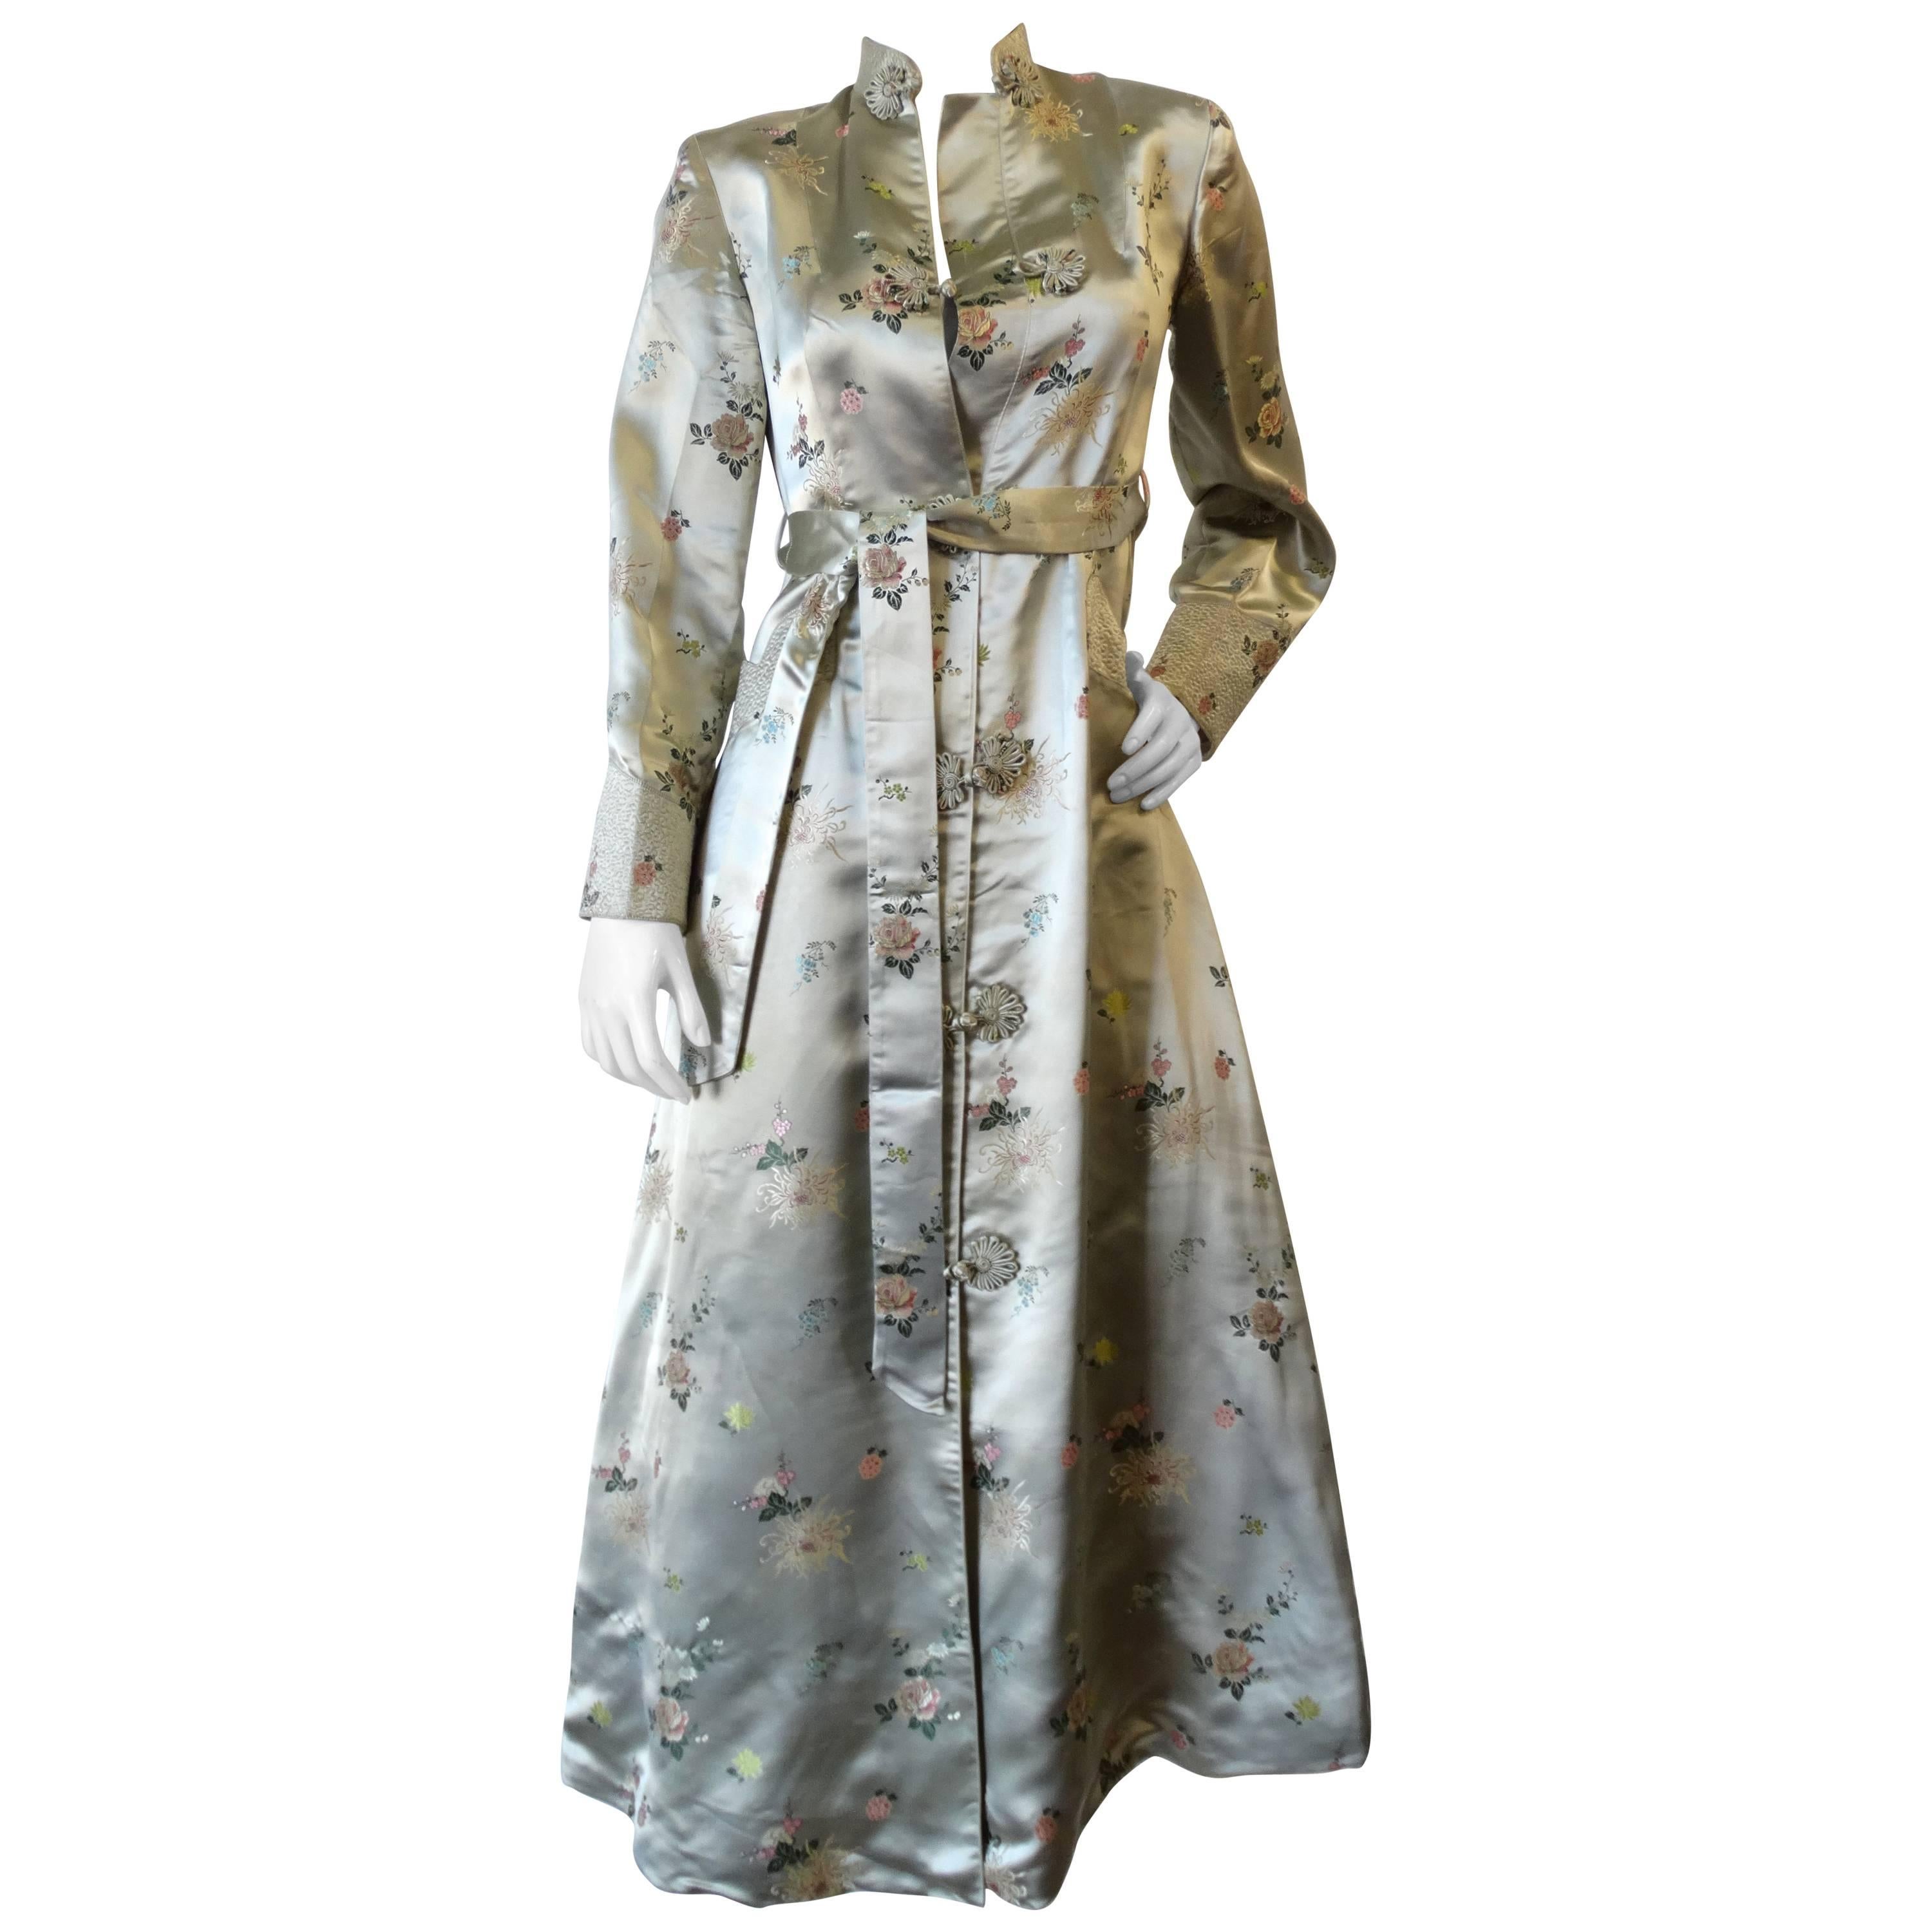 Vintage Chinese Cheongsam Inspired Satin Embroidered Coat 